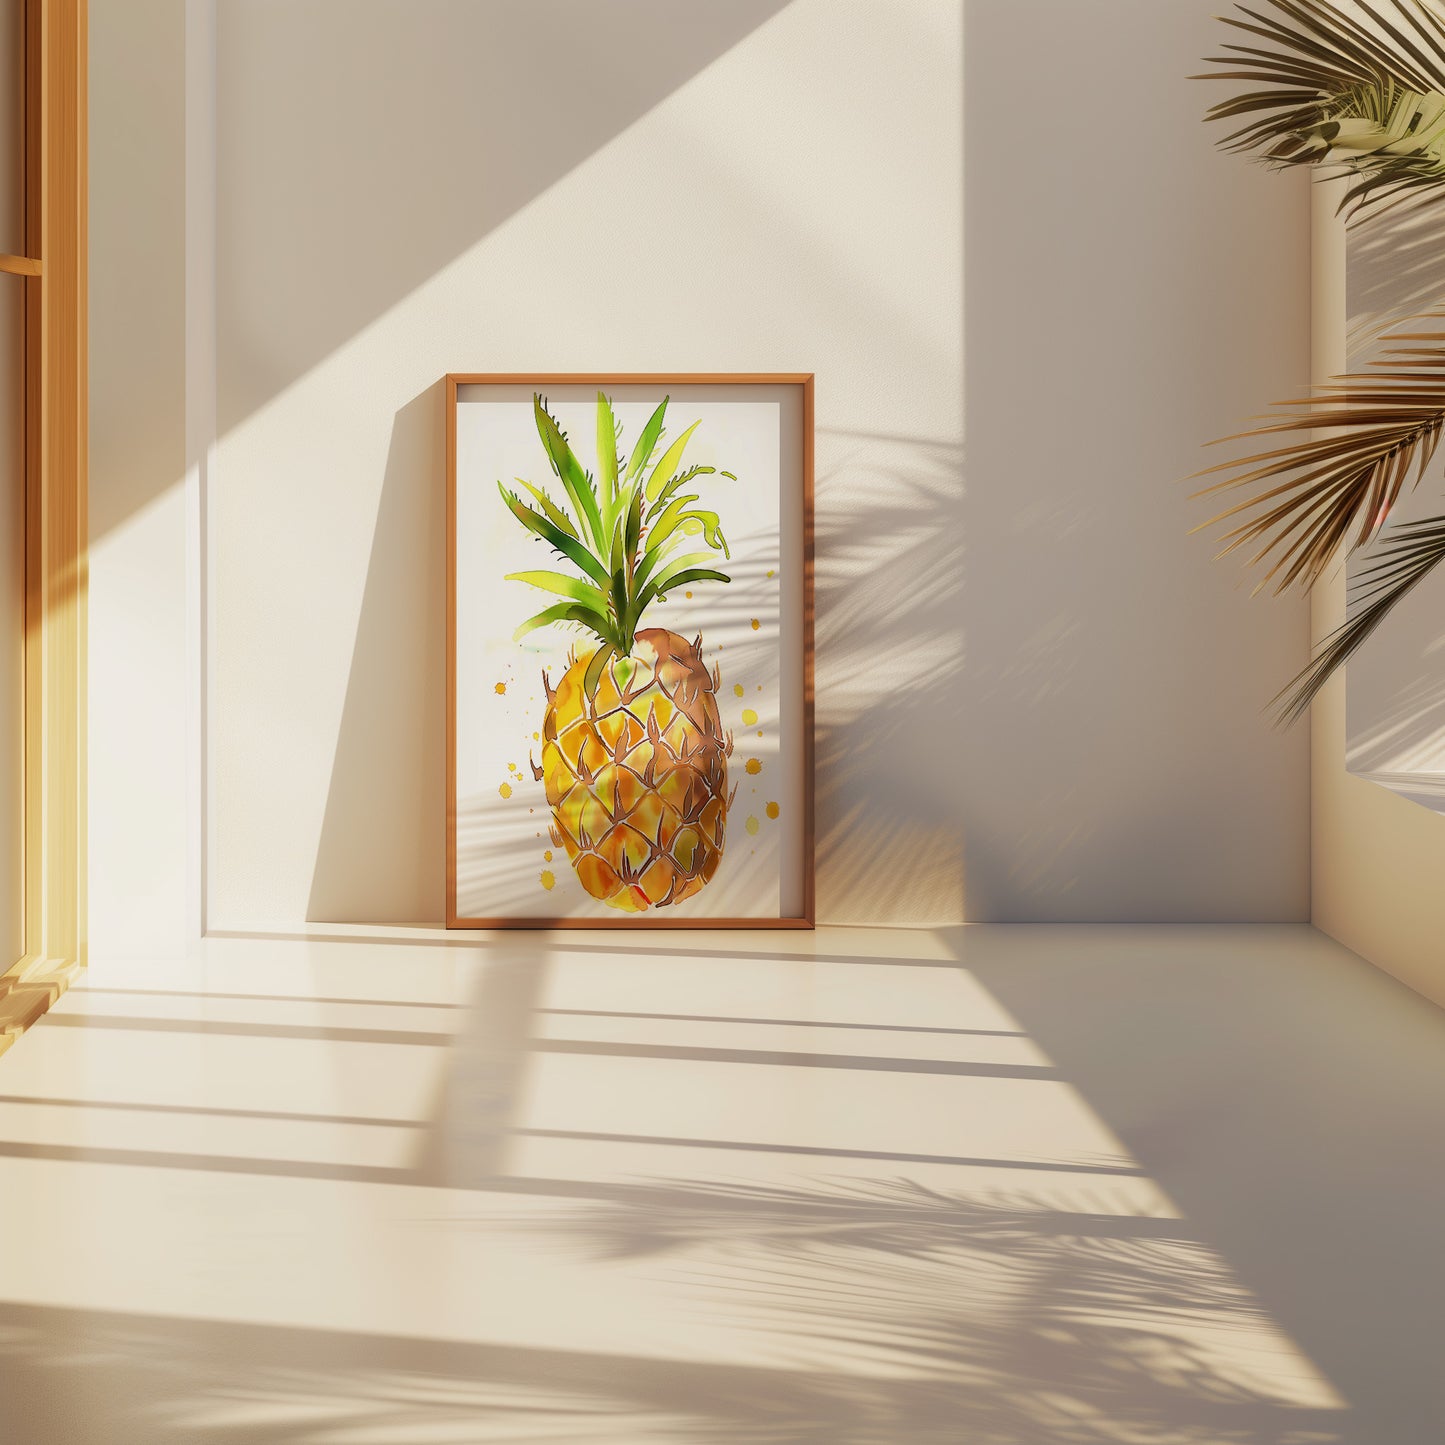 Framed painting of a pineapple on a sunny floor with shadows of window blinds.